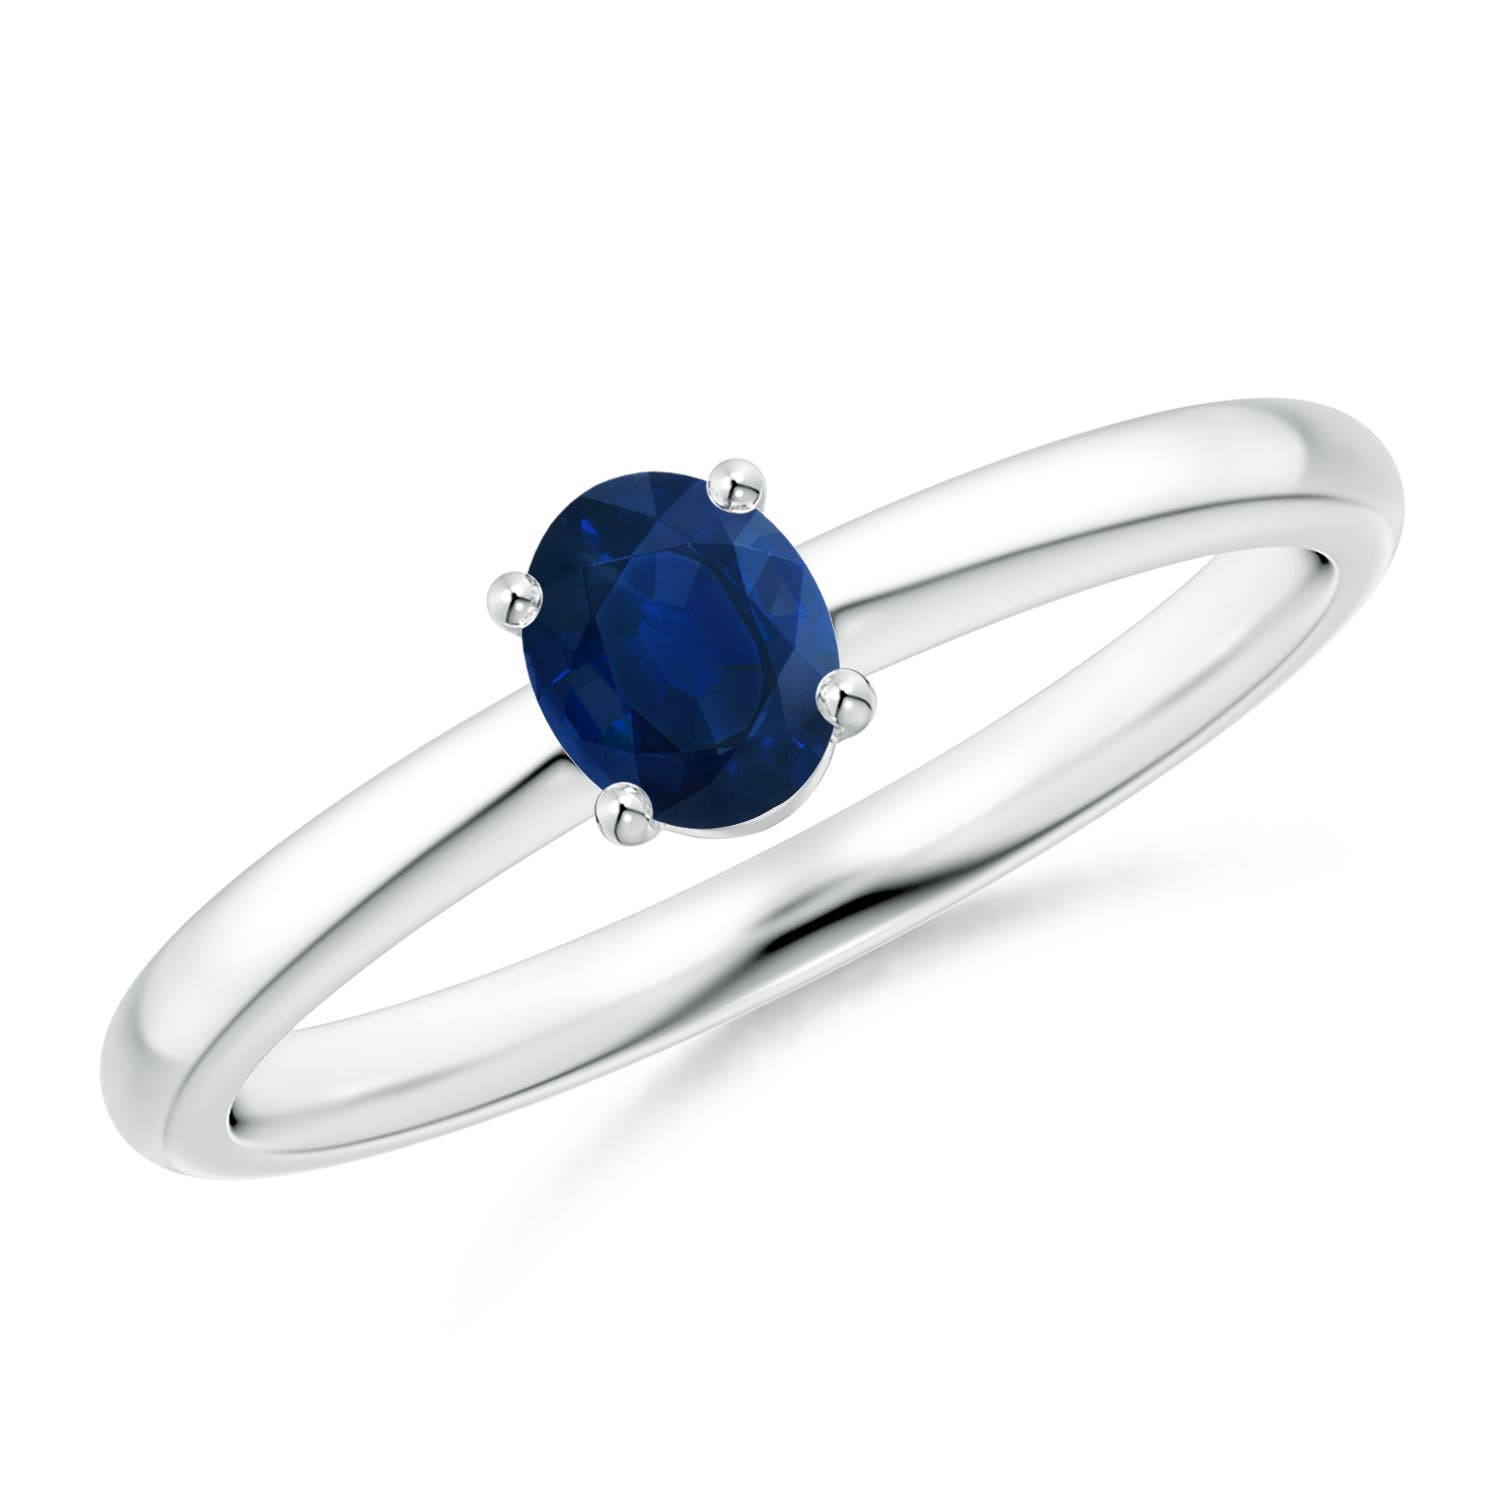 AA - Blue Sapphire / 0.4 CT / 14 KT White Gold